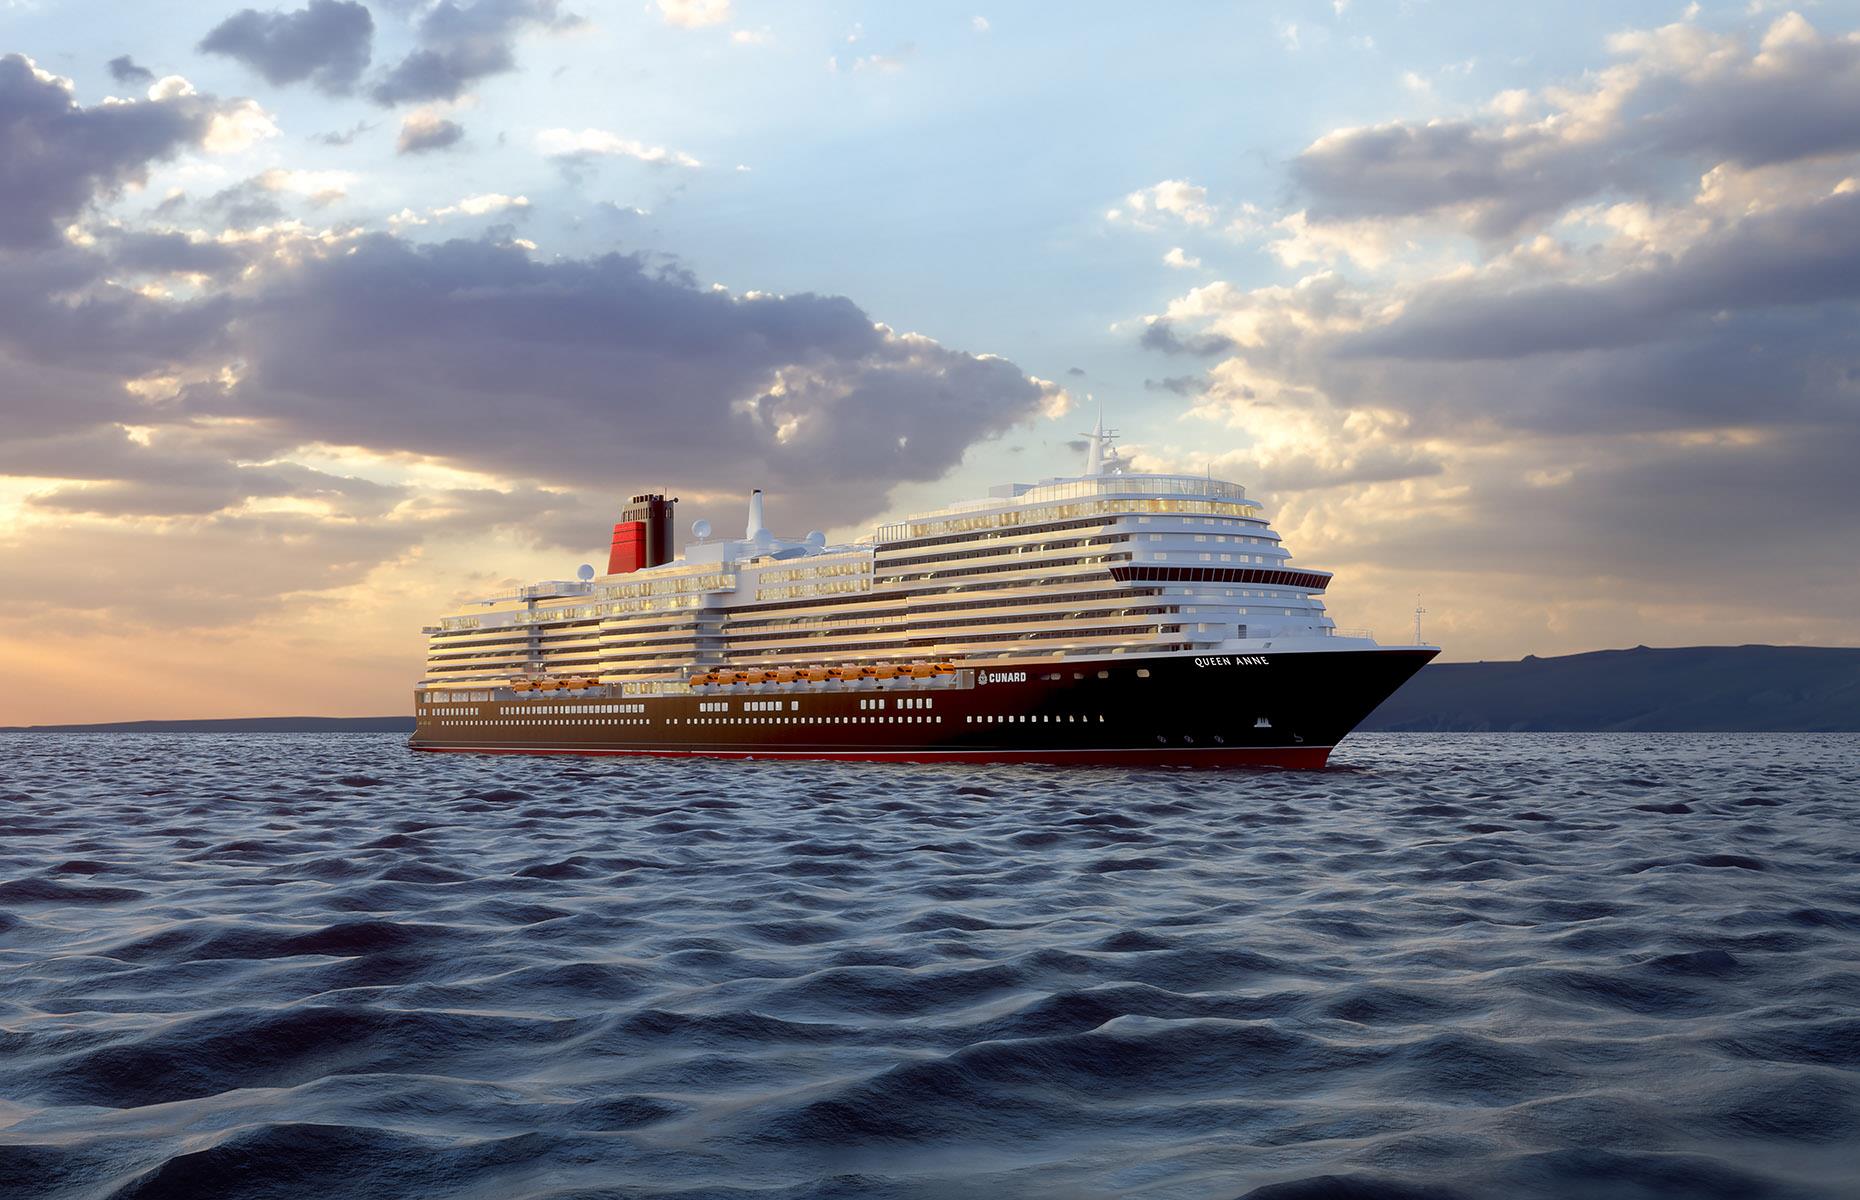 <p>Launching in May 2024, Queen Anne is the newest cruise liner in the Cunard fleet and the 249th ship to sail under its historic flag. On board, life centers around the three-story grand lobby, a show-stopping space celebrating 182 years of Cunard. For the ship's 2,996 guests, entertainment can be found in the casino, library, art gallery and 825-seat theater, while the Queens Room hosts everything from afternoon tea and classical recitals to ballroom dancing. As if that's not enough, there's also a spa, wellness center and The Pavilion – a space with a retractable glass dome roof where passengers can enjoy open-air theater, cinema screenings and live music.</p>